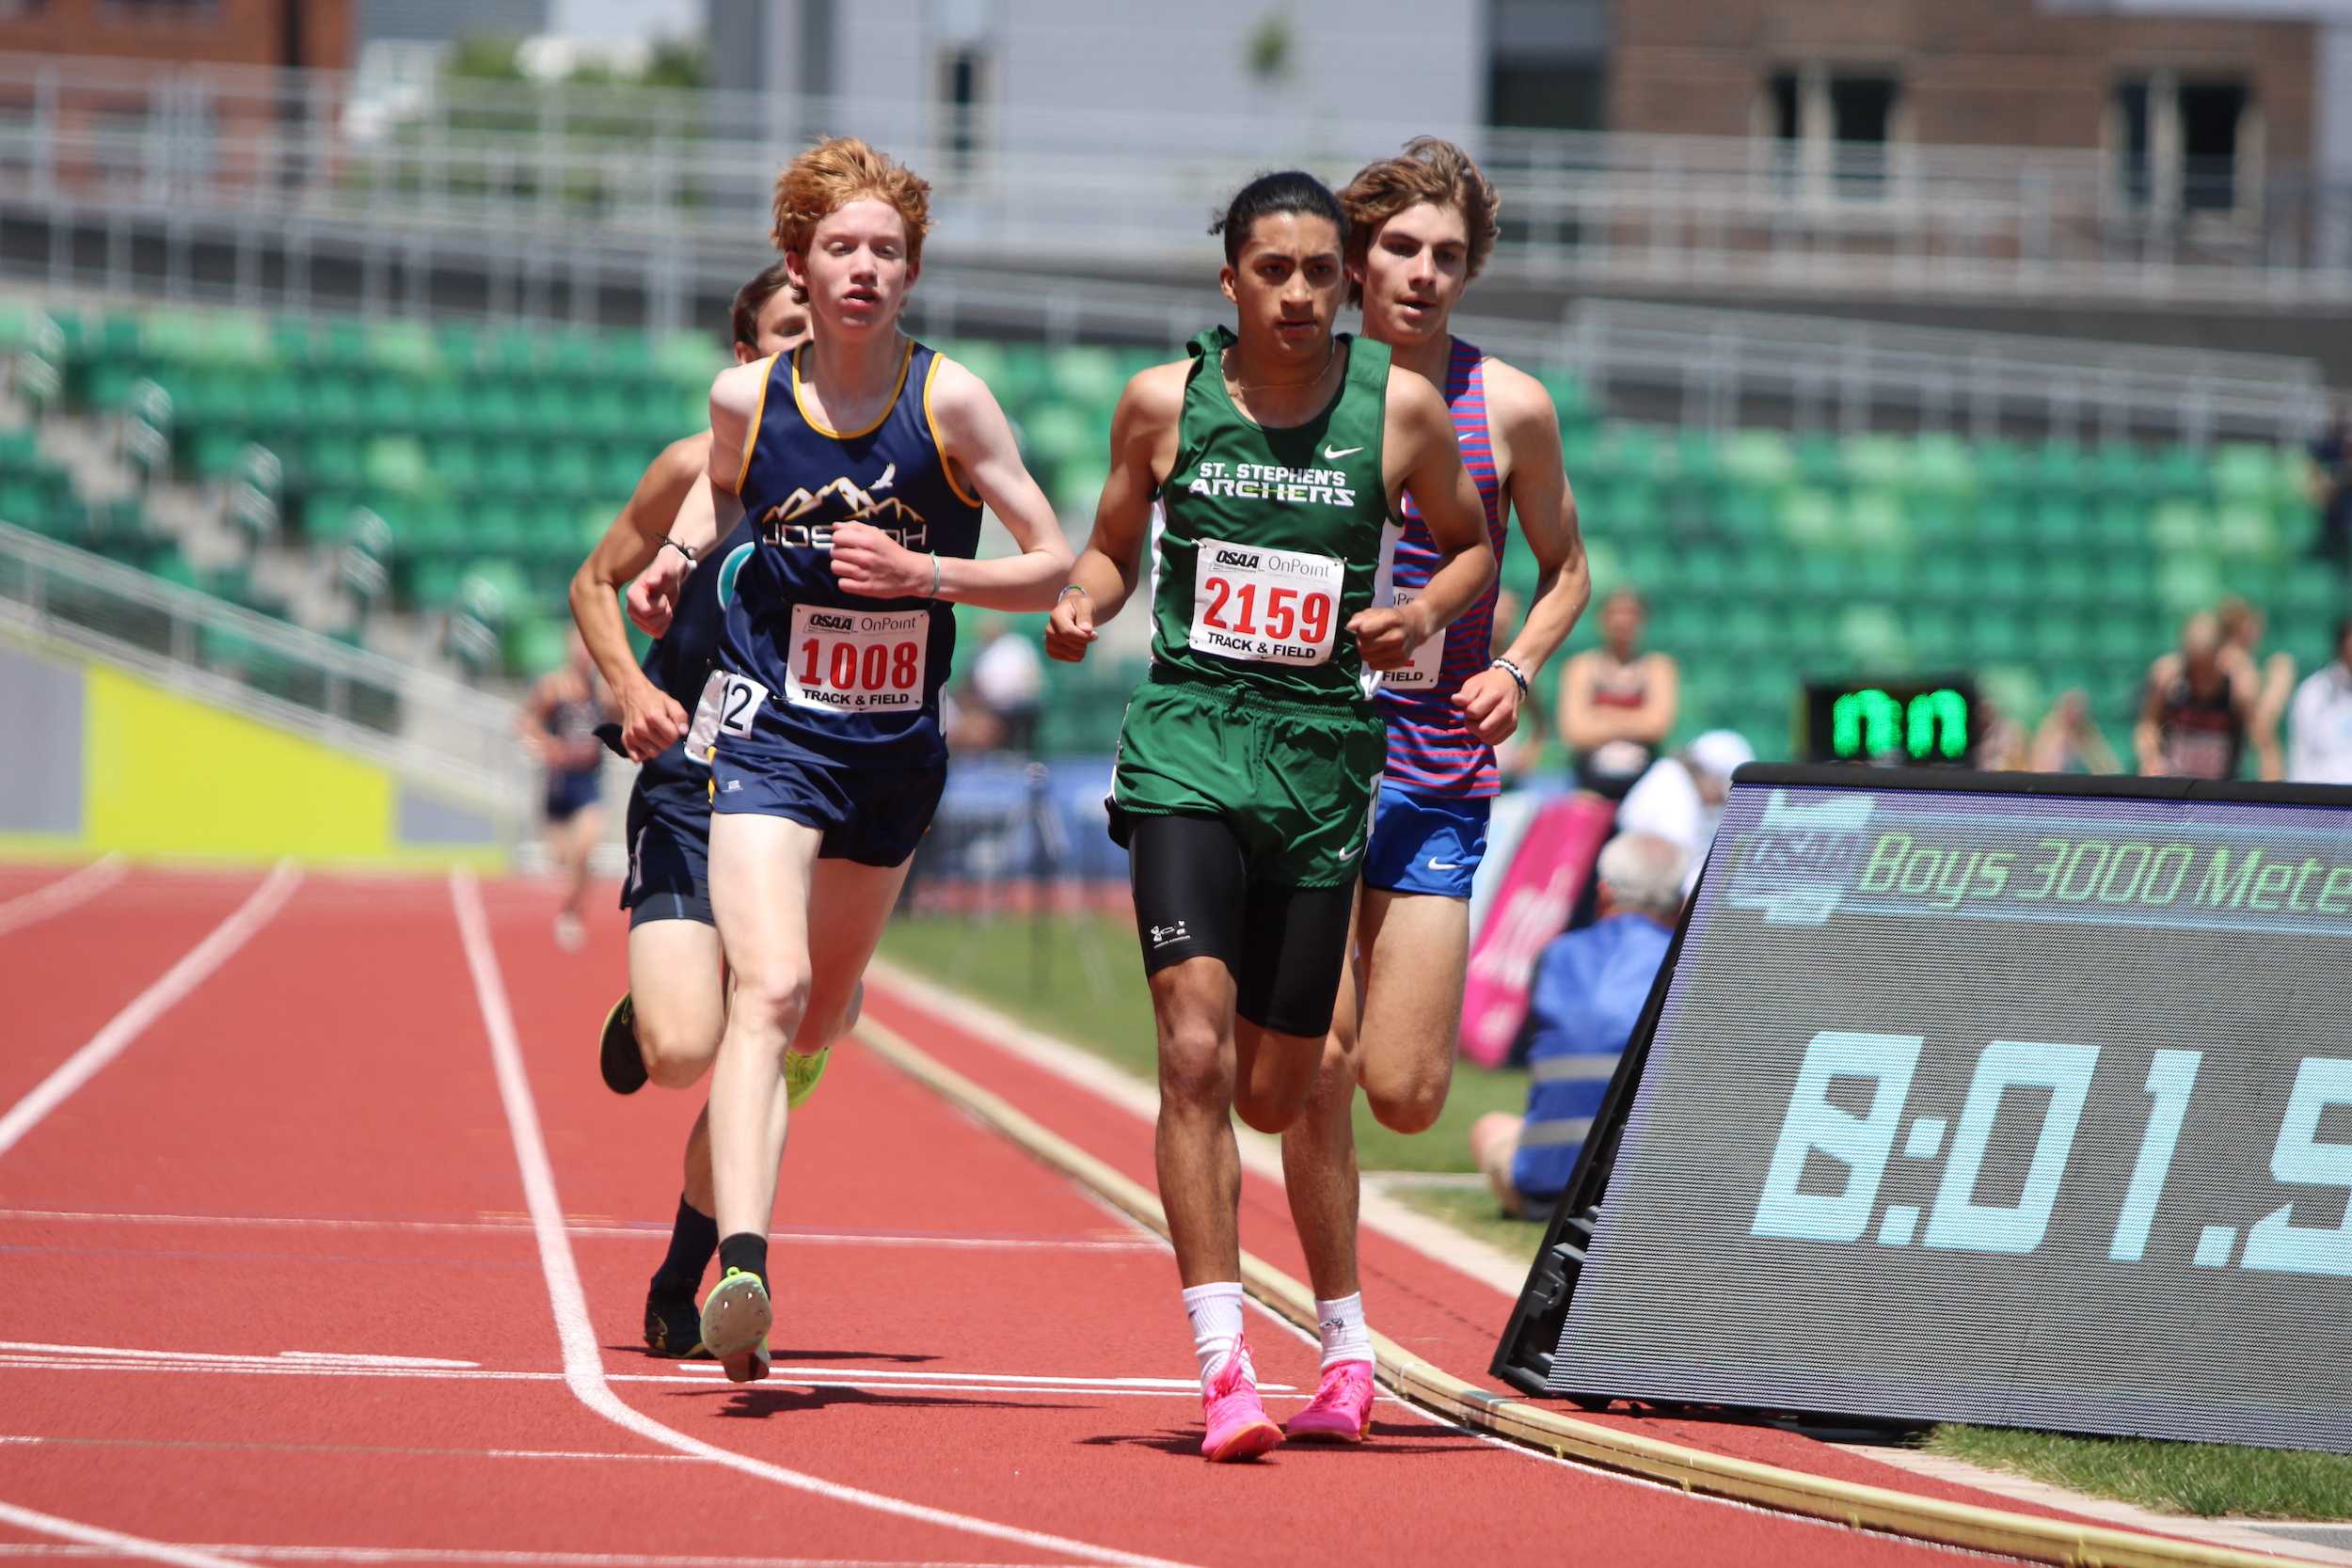 Joseph's Jett Leavitt, St. Stephen's Nathan Contreras, and Condon's Grady Greenwood (L to R) wage battle in the 1A boys' 3,000.